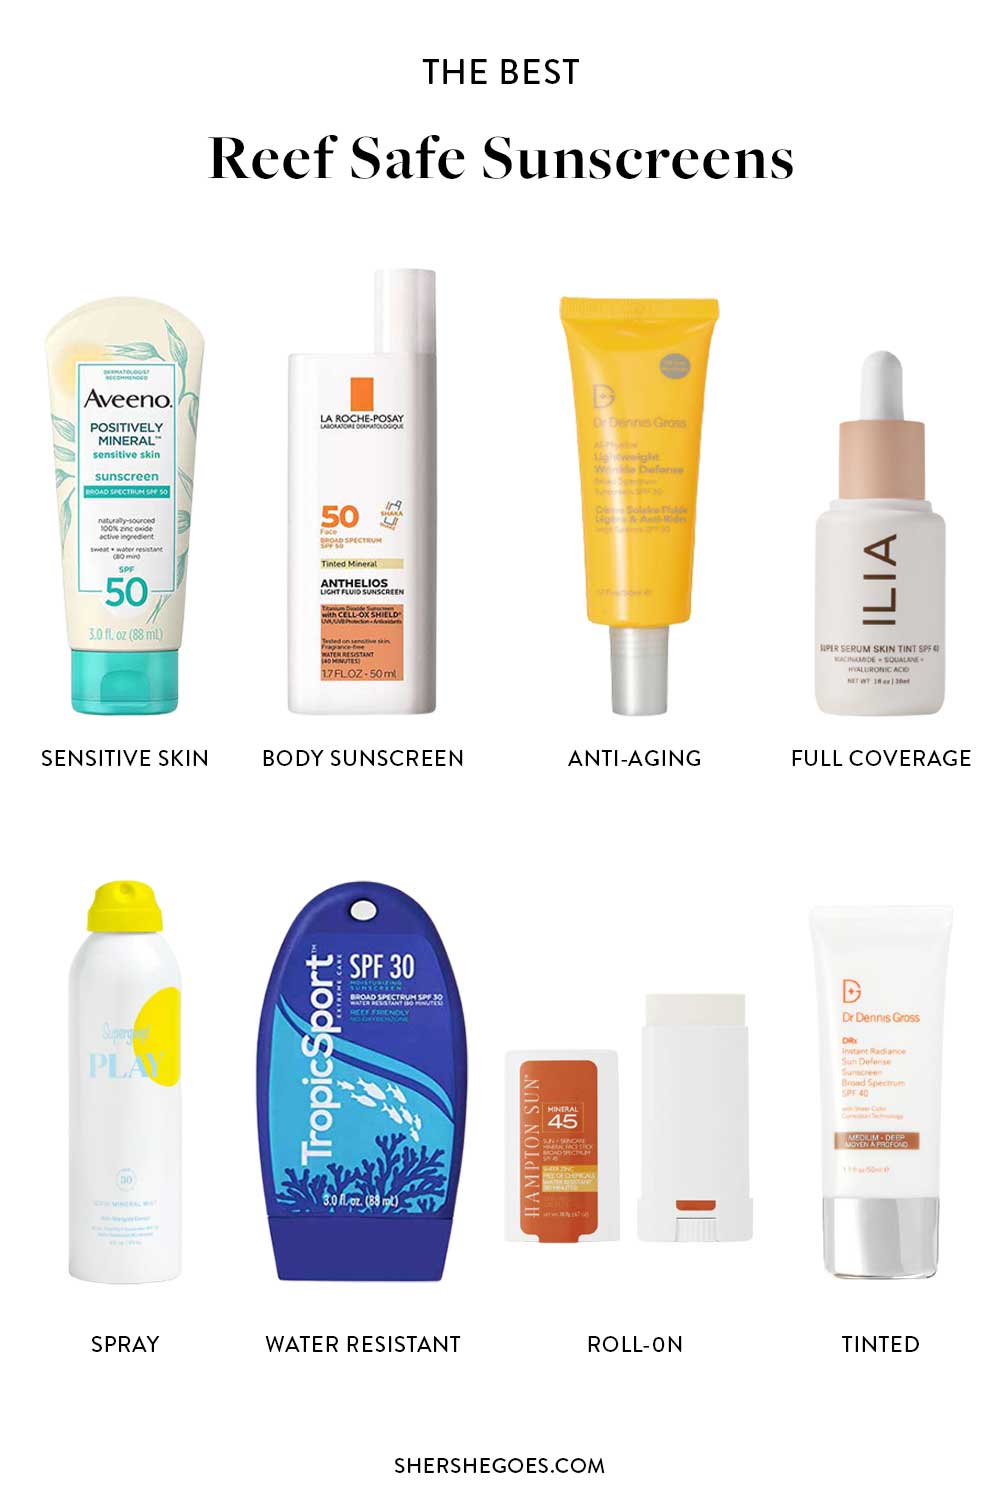 The Best Reef Safe Sunscreen for UVA, UVB + Coral Reef Protection